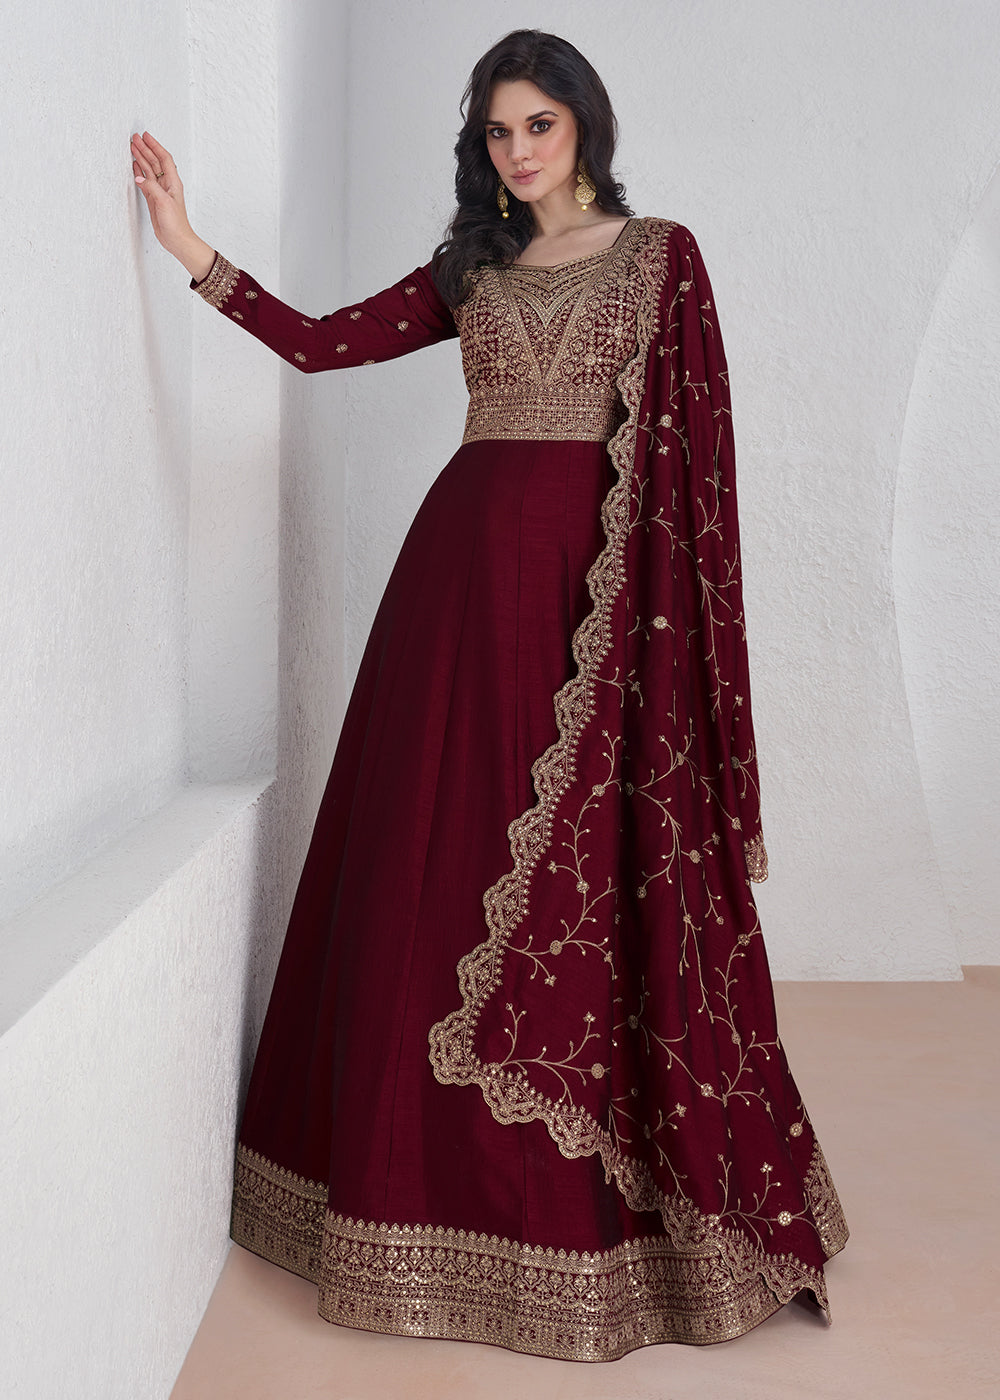 Mahogany Red Silk Anarkali Suit with Embroidery work